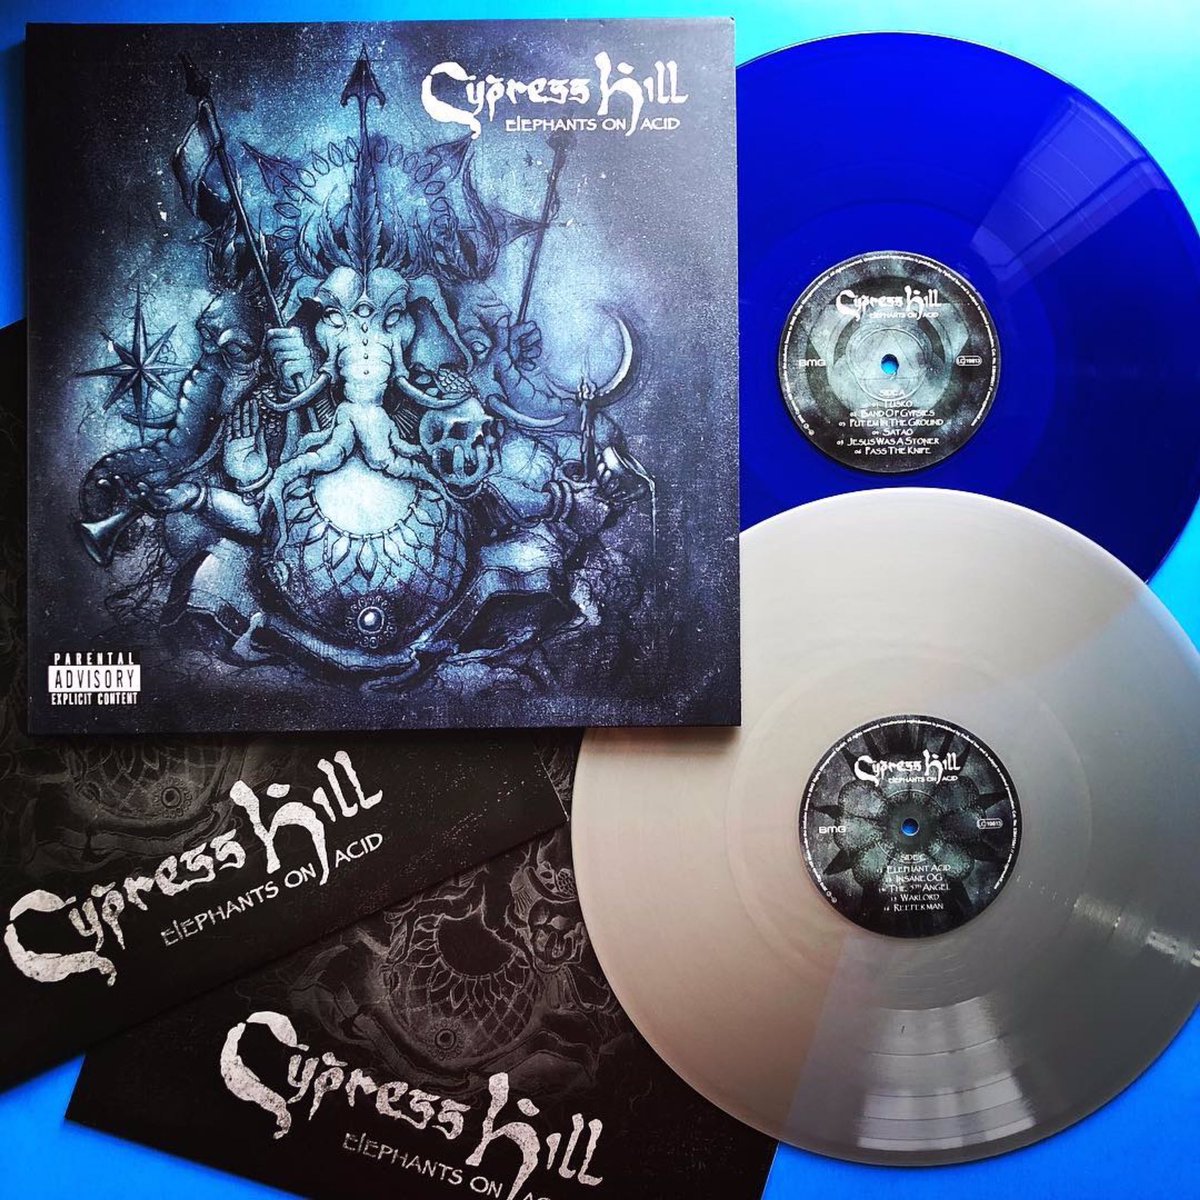 on Twitter: "Who will the vinyl of "Elephants On Acid" by @cypresshill??? https://t.co/UhWmtyk760" / Twitter